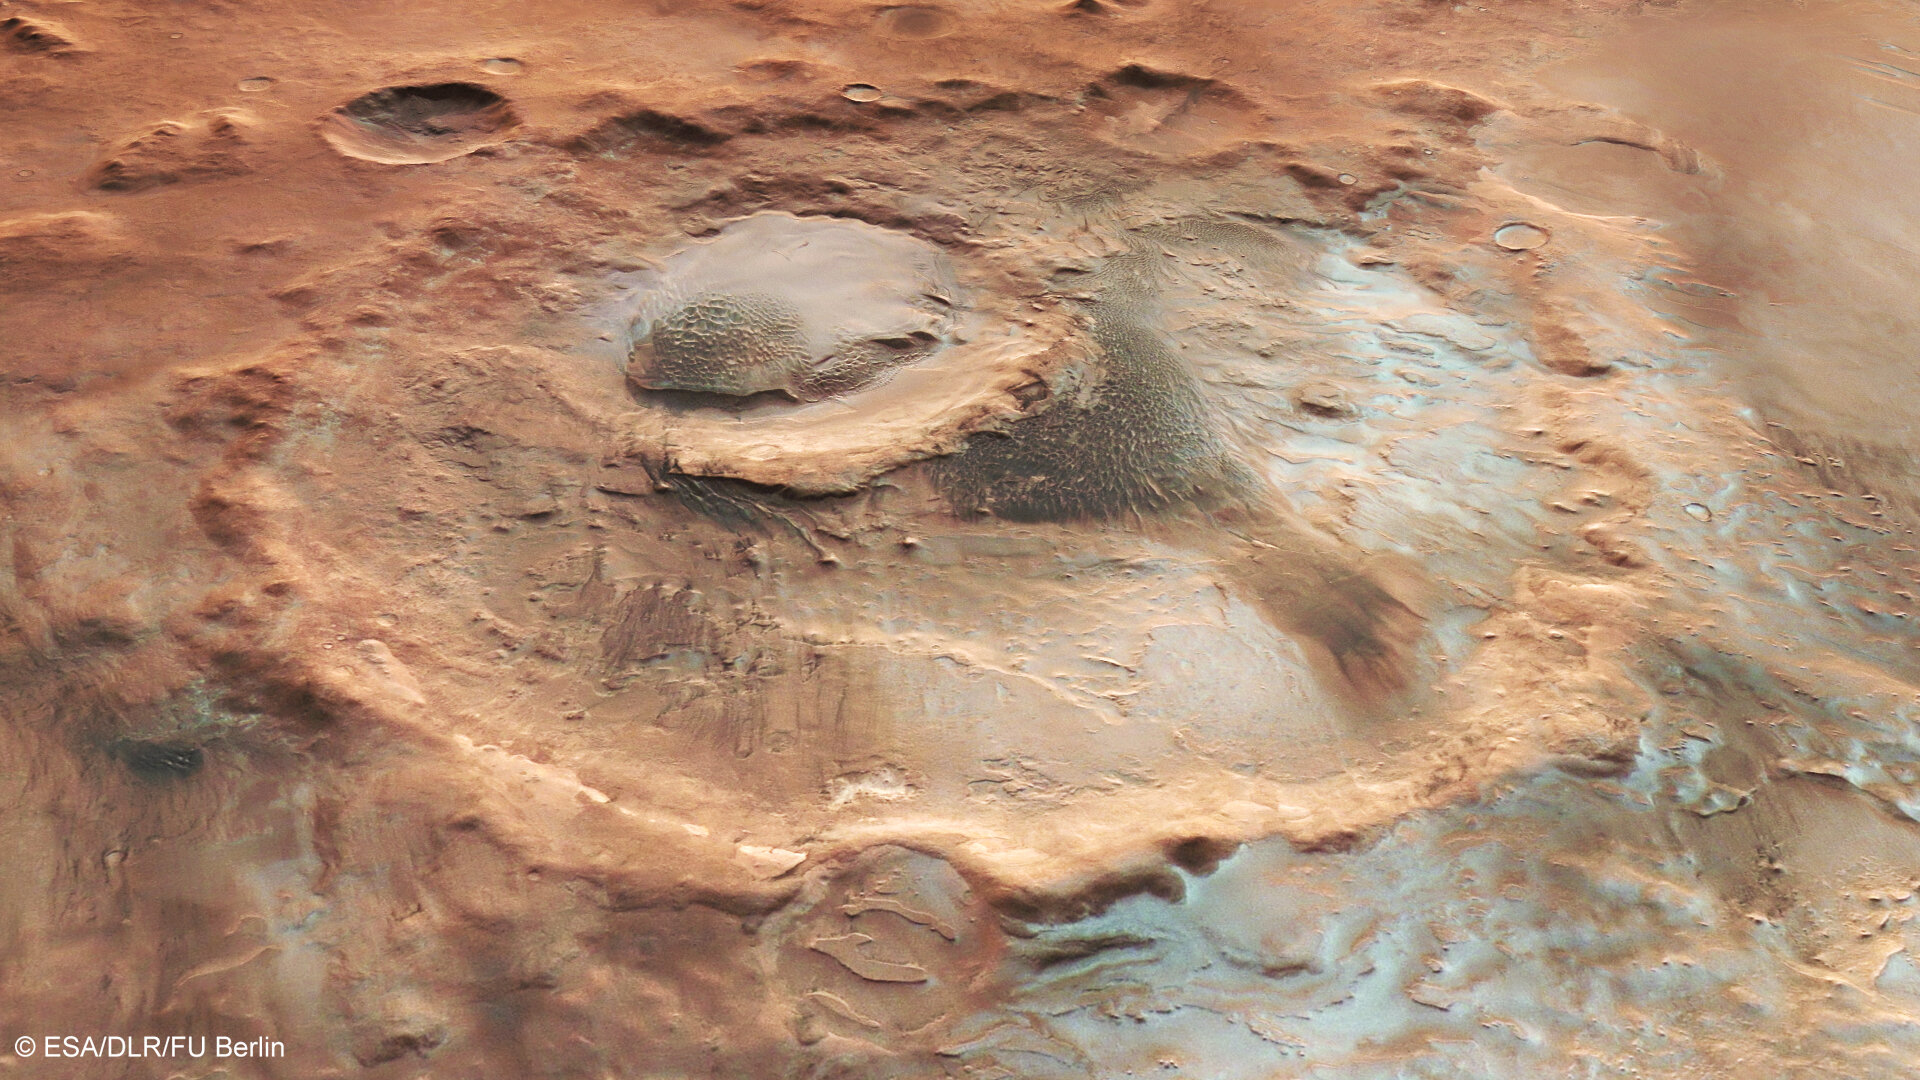 Perspective view of Hooke crater in Argyre basin